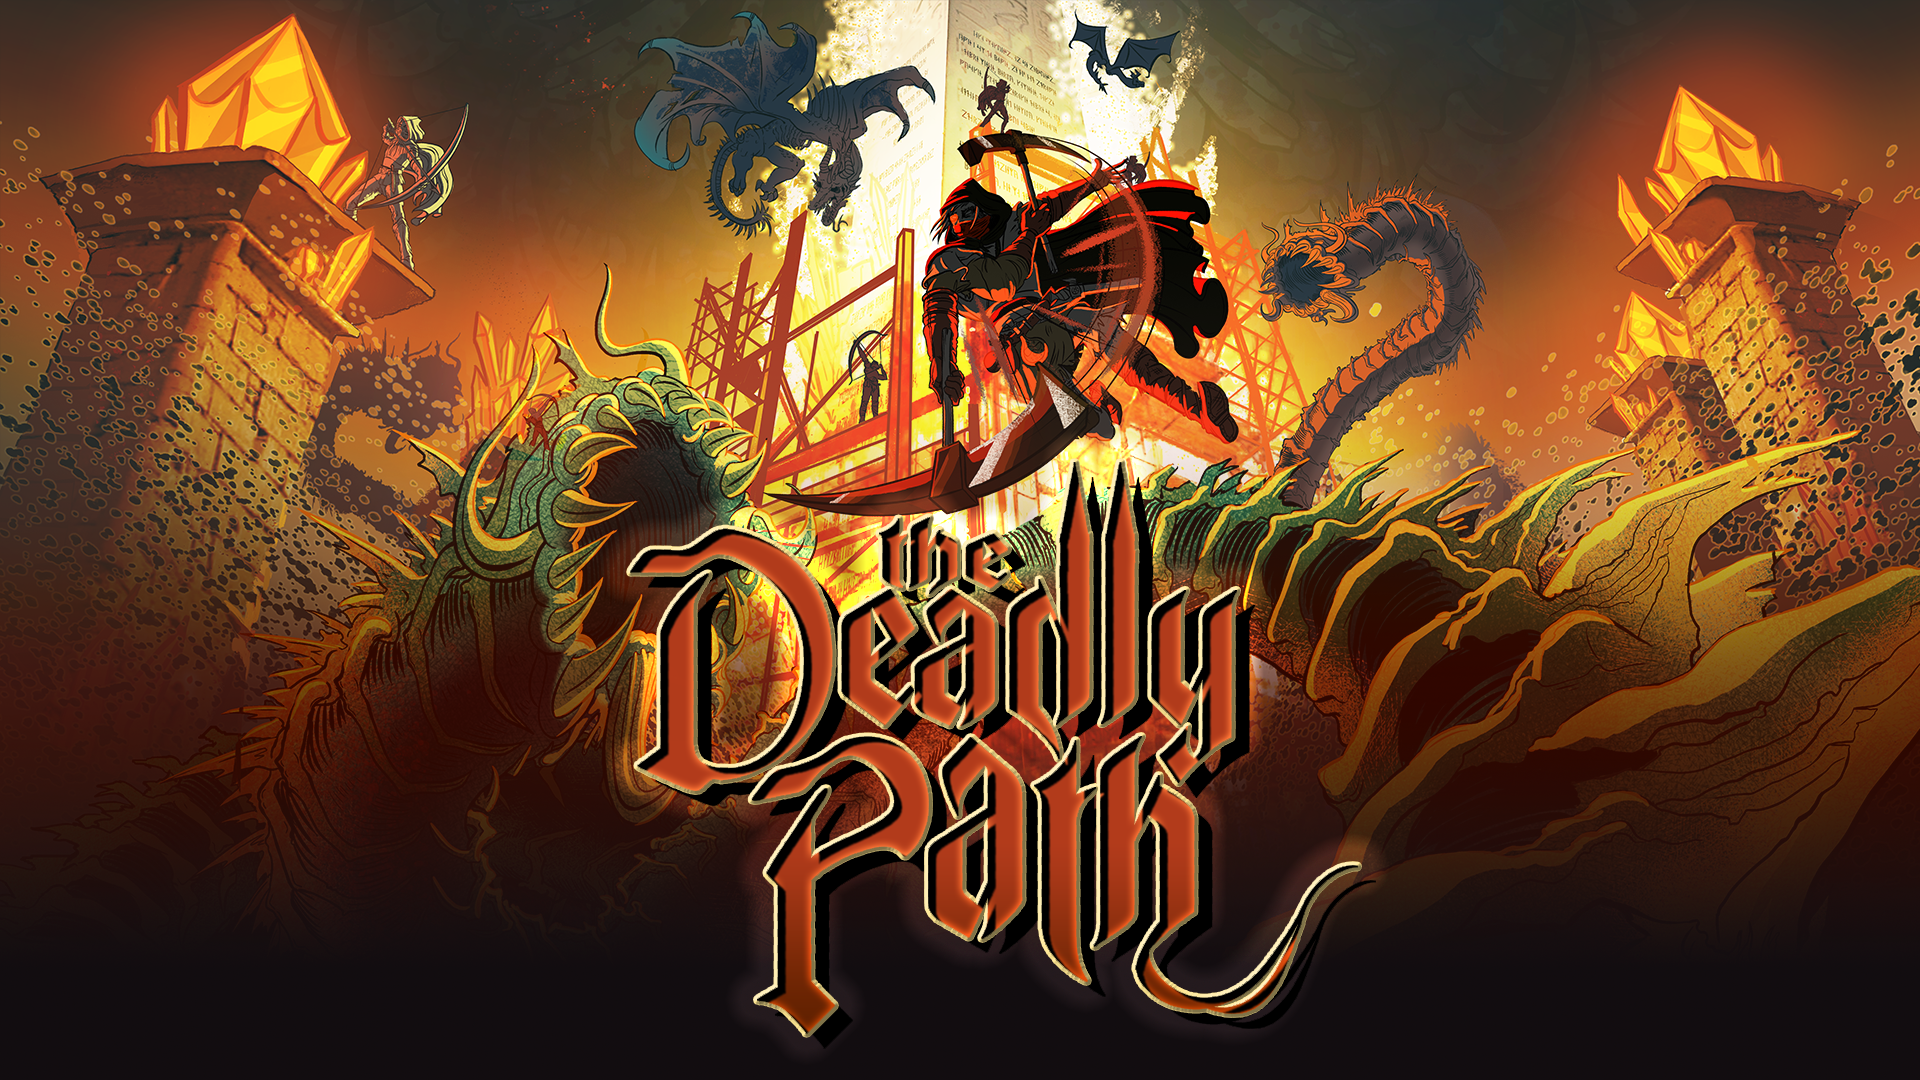 Fireshine games is set to publish dungeon management roguelike The Deadly Path